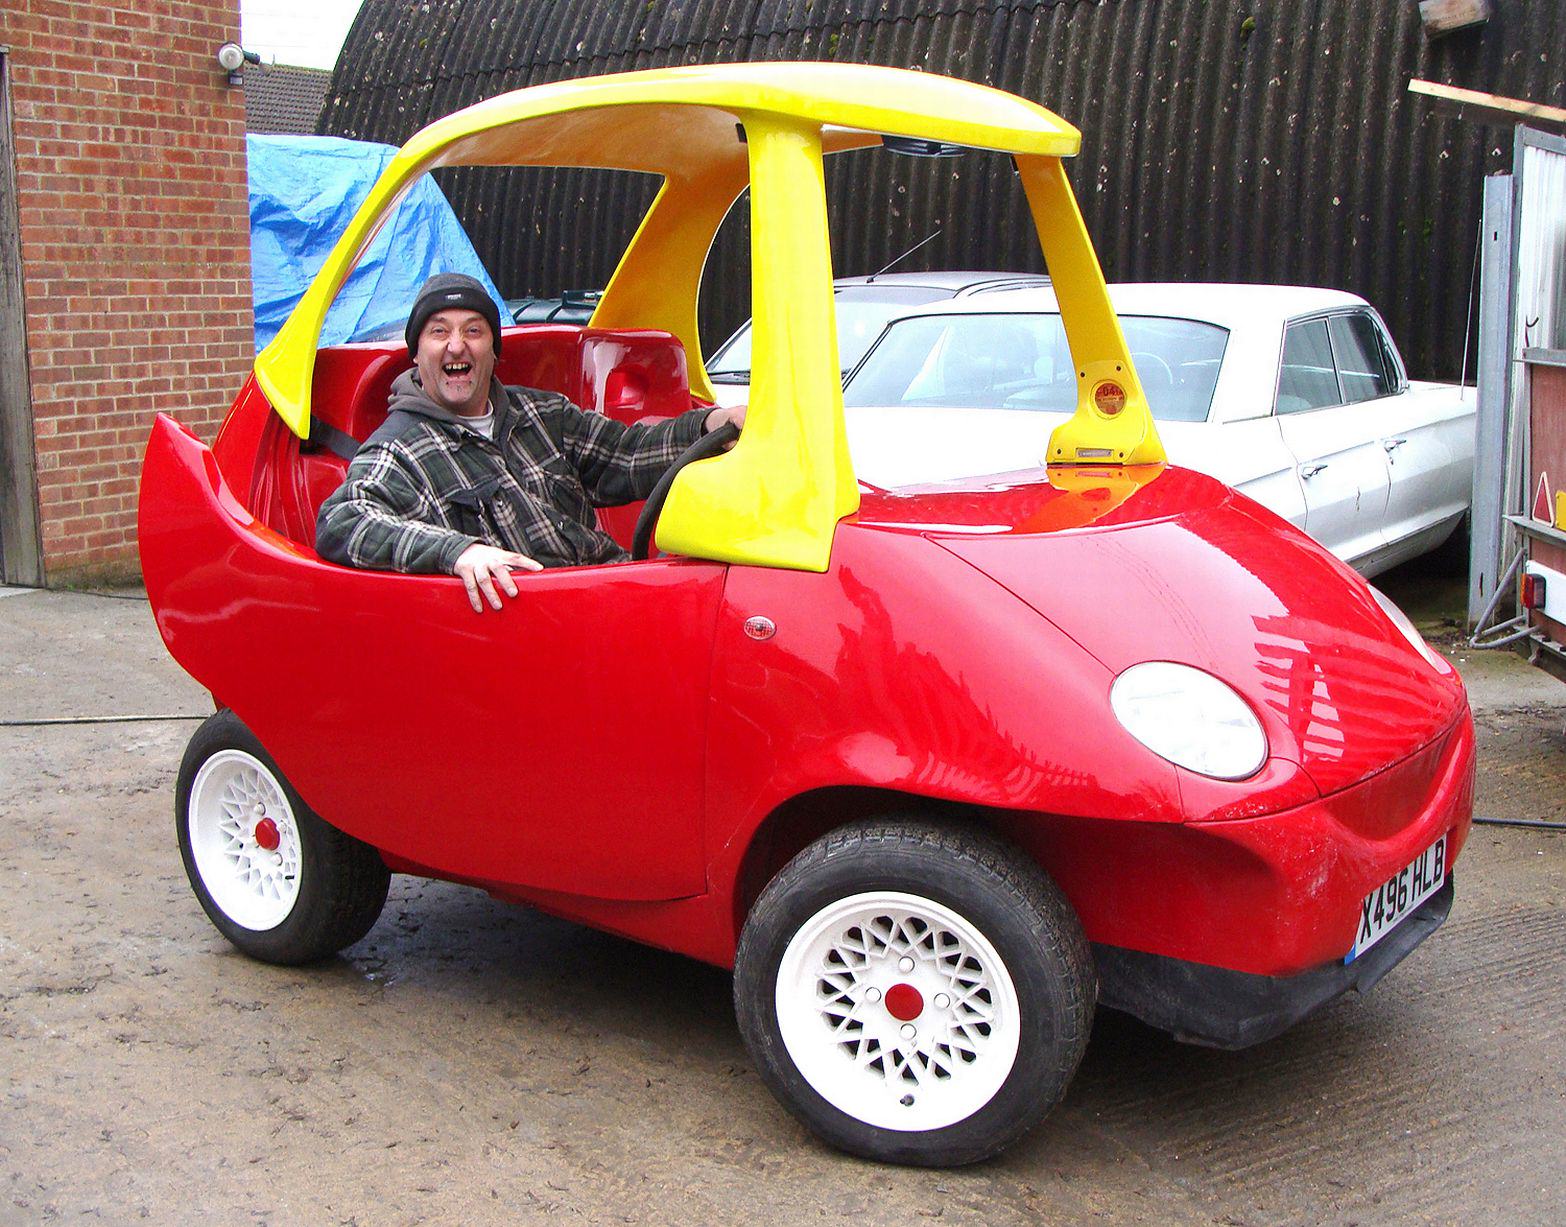 Gas-Powered Adult Version of Little Tikes Car Now Up For Sale on eBay